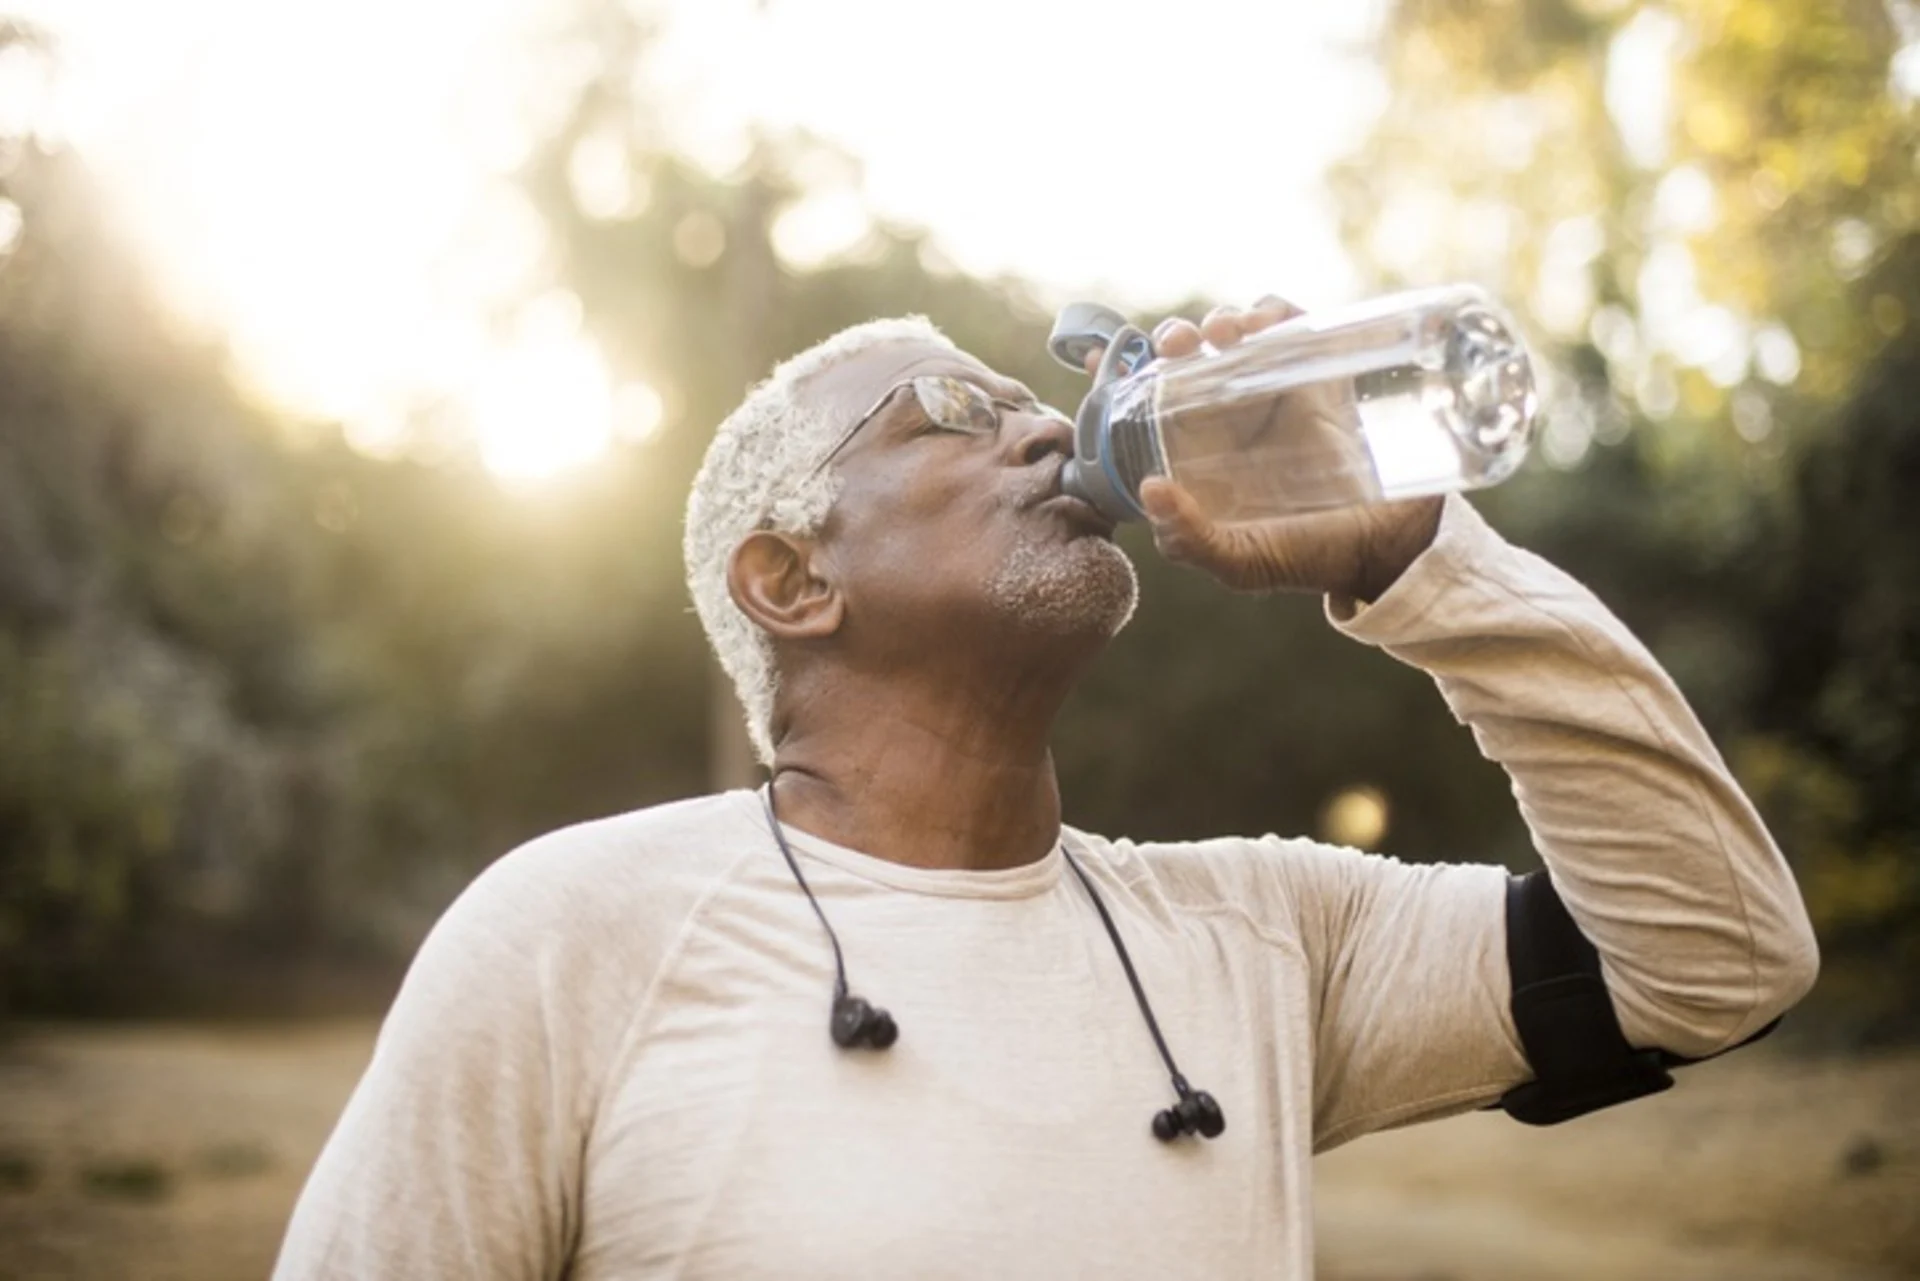 Staying hydrated on a hot day is a lot more important than you think